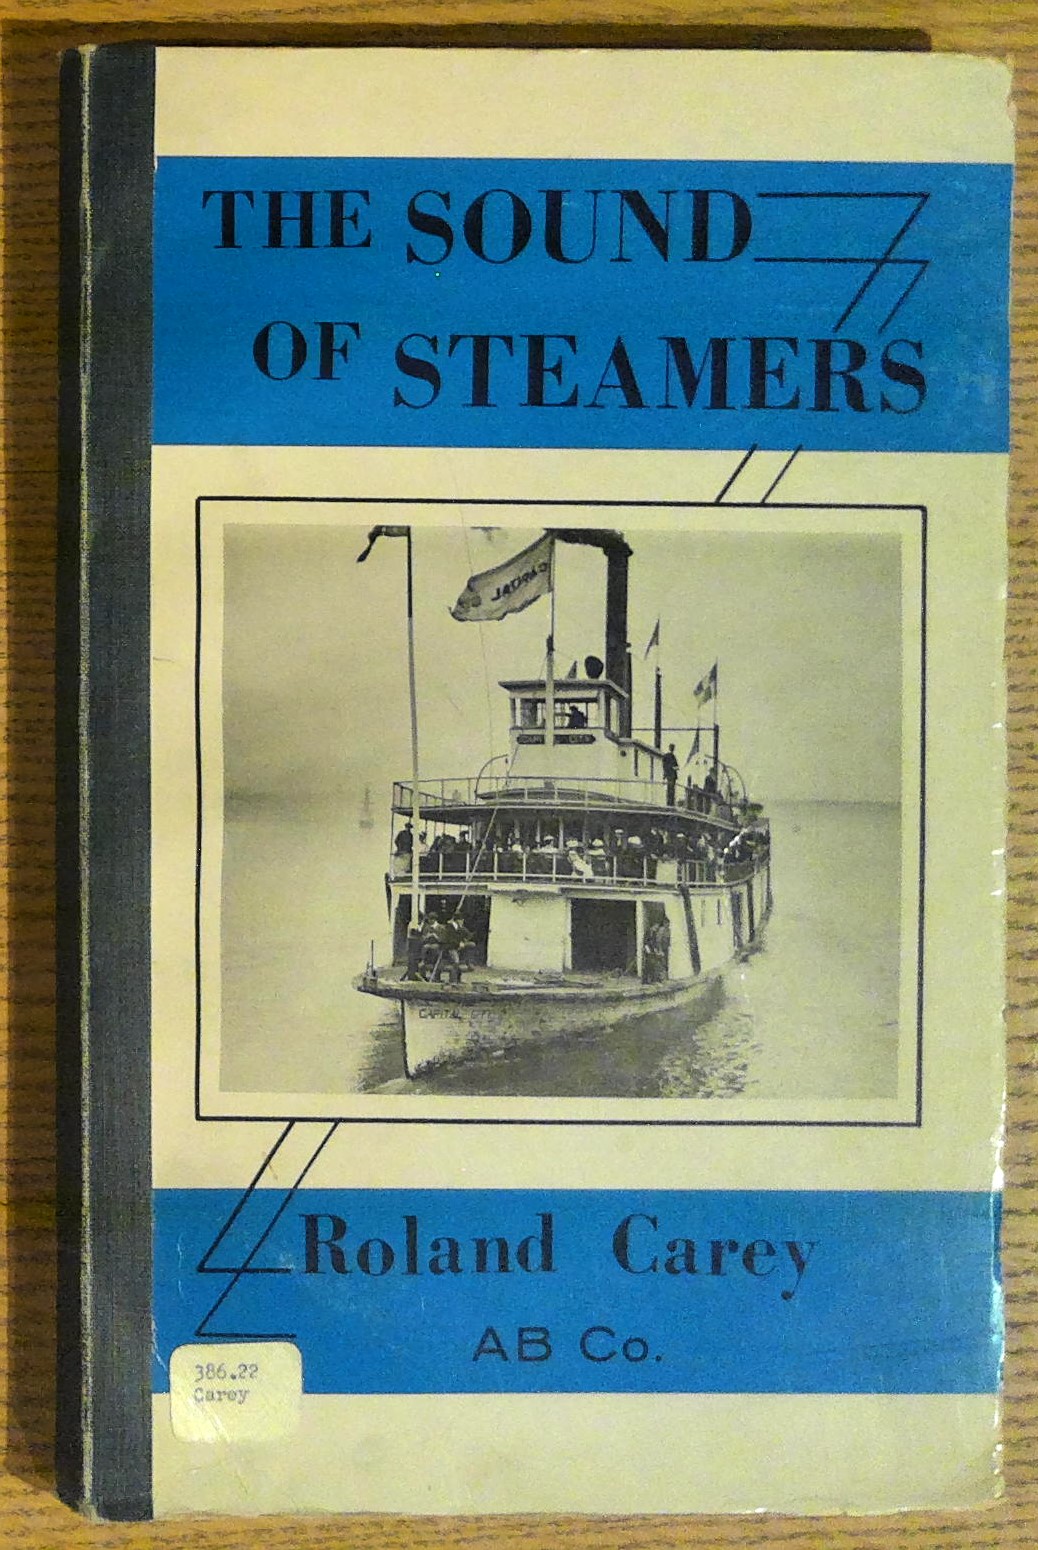 The Sound of Steamers